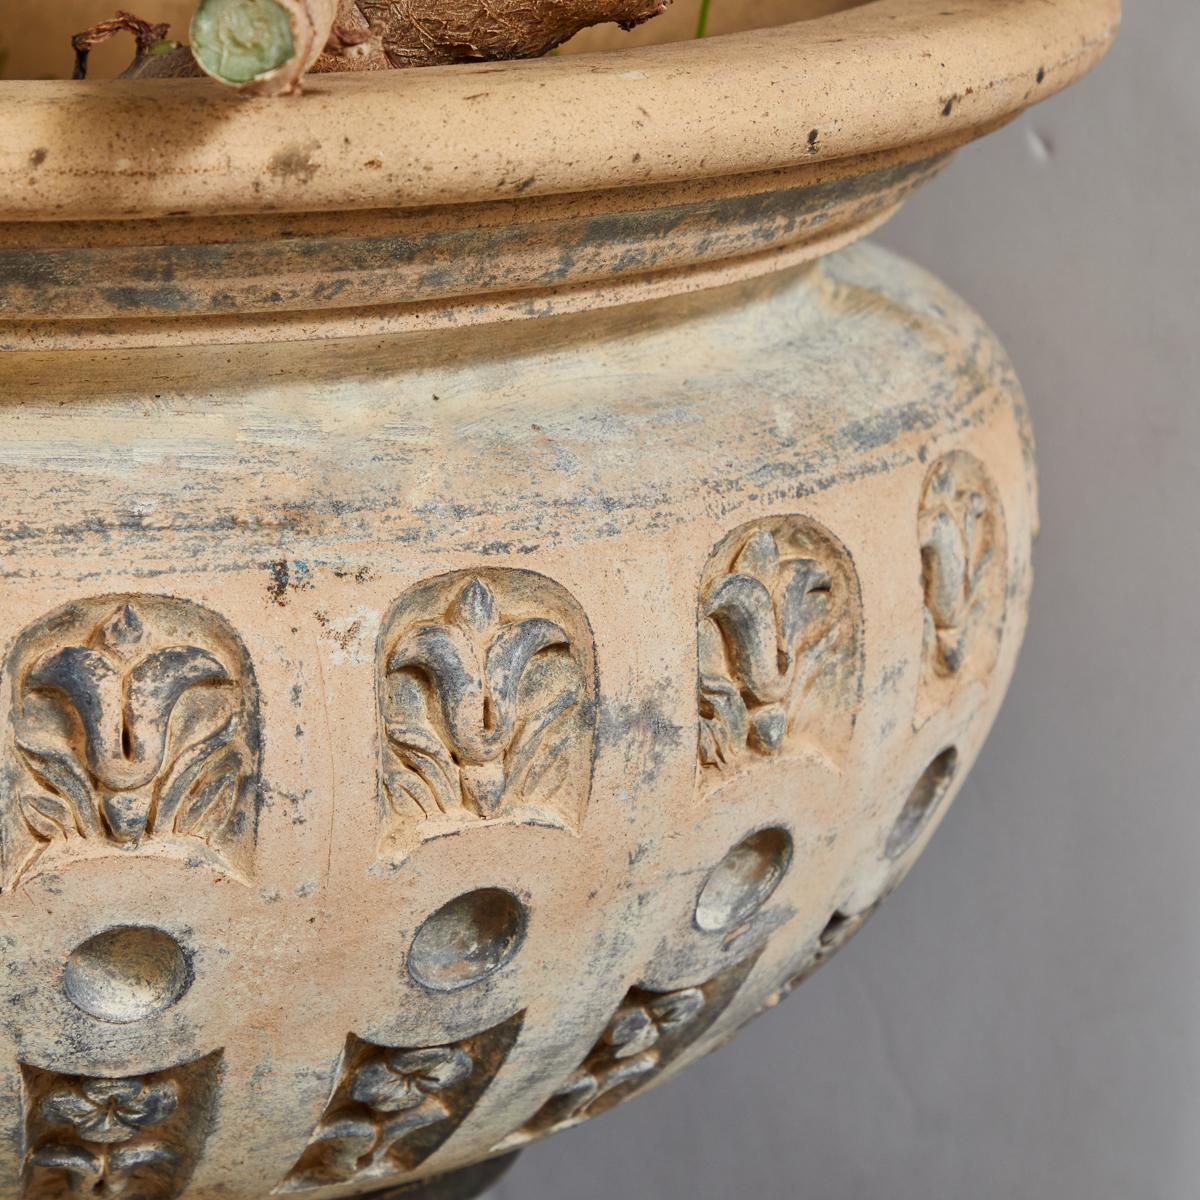 English Elegant Terracotta Planter with Flared Rim from 19th Century, England